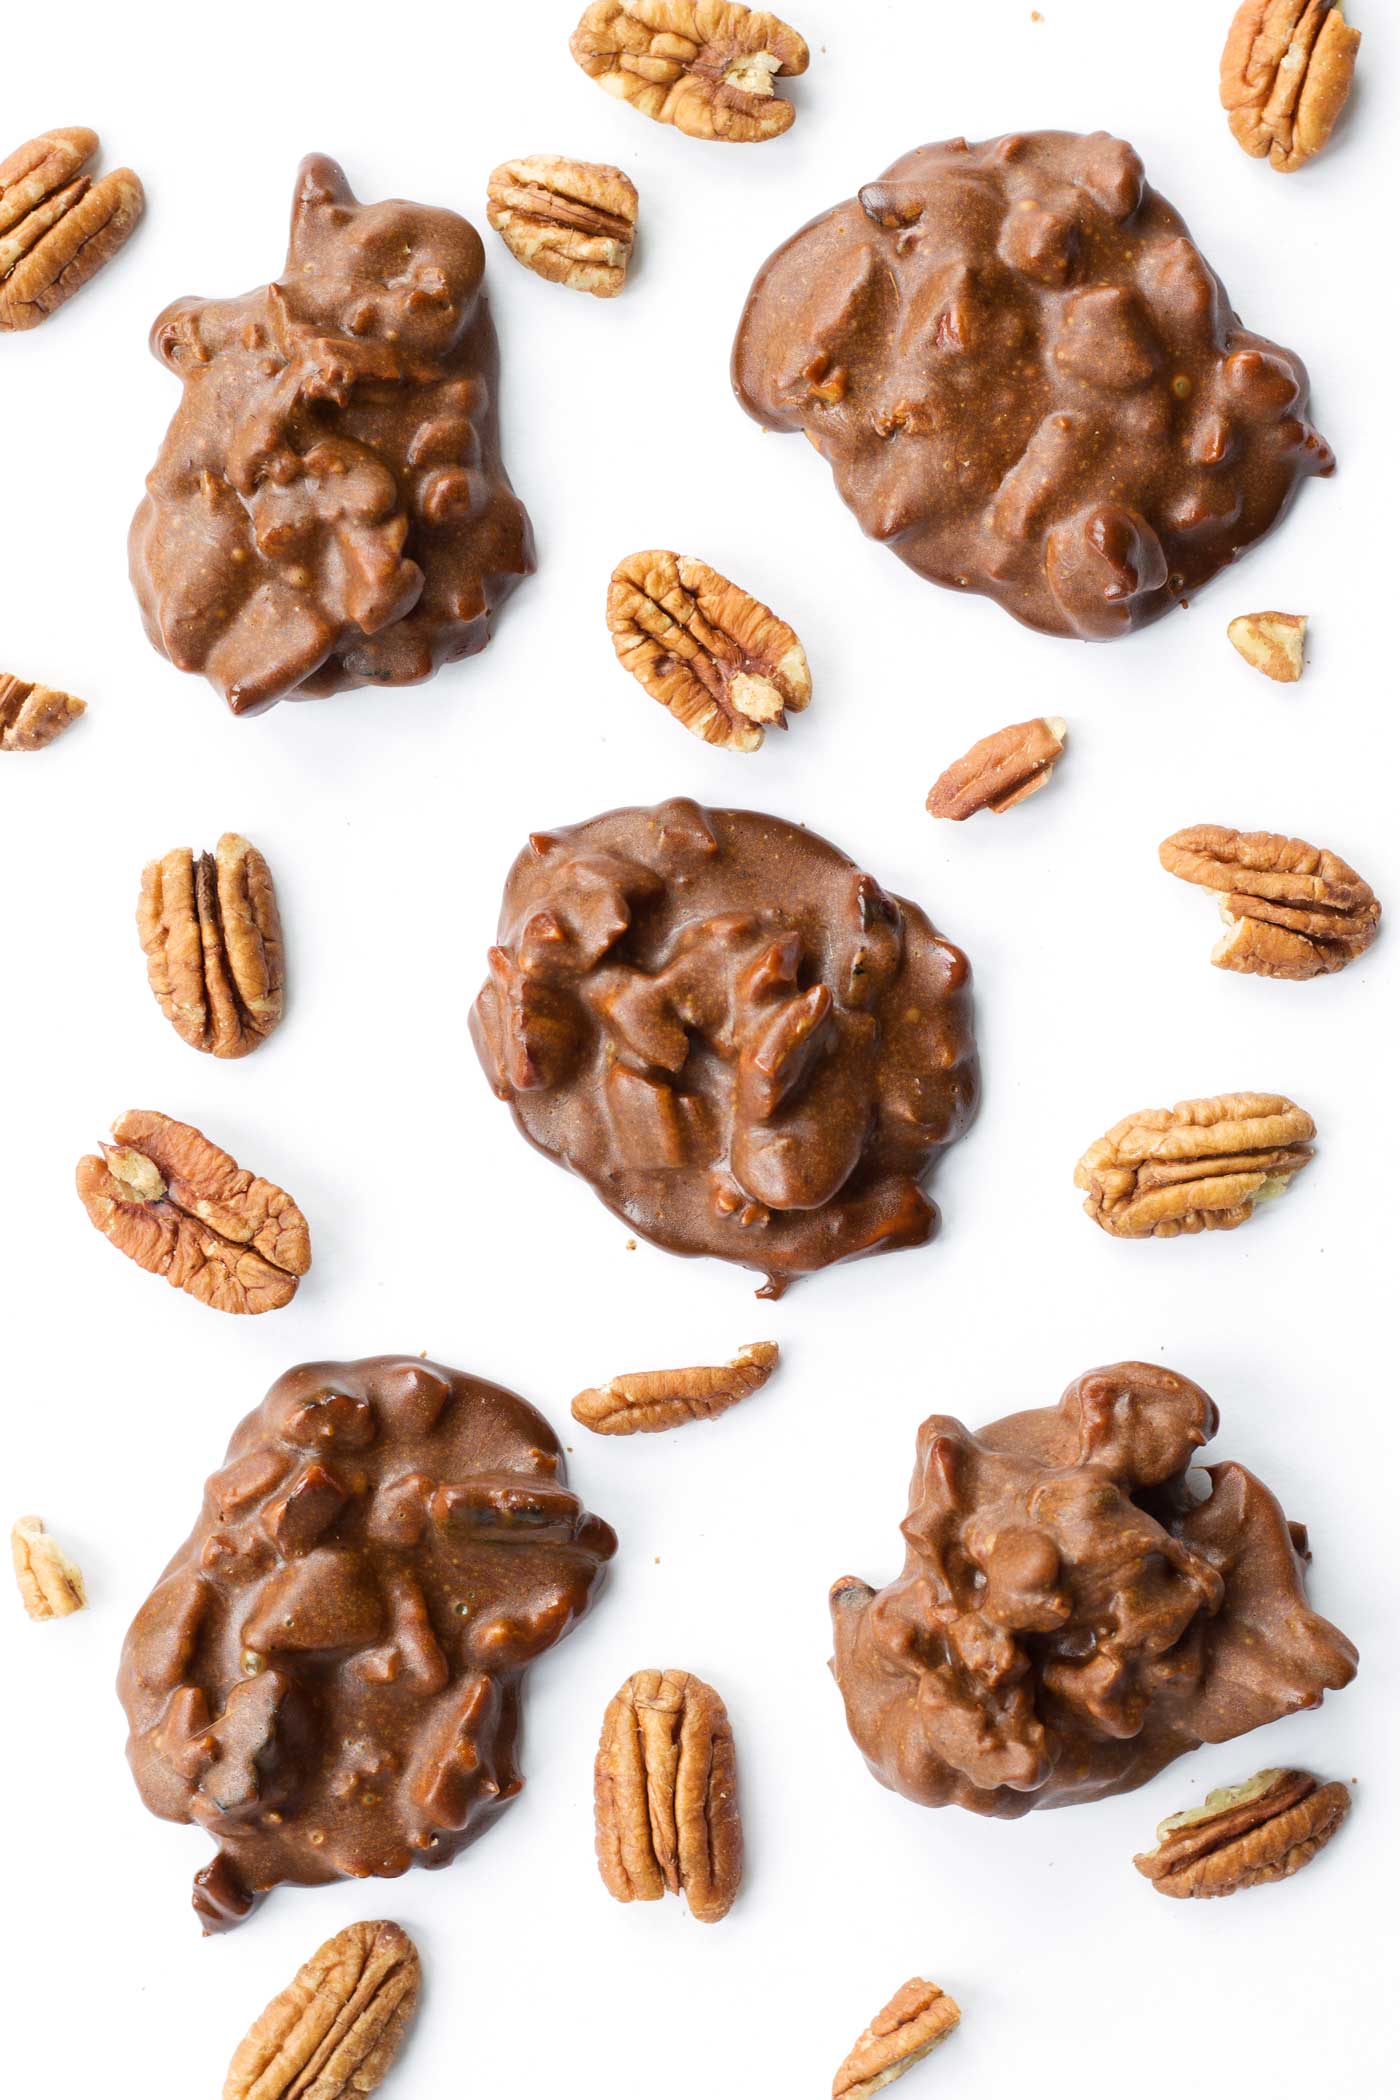 What Are Pralines and Where Do They Come From?